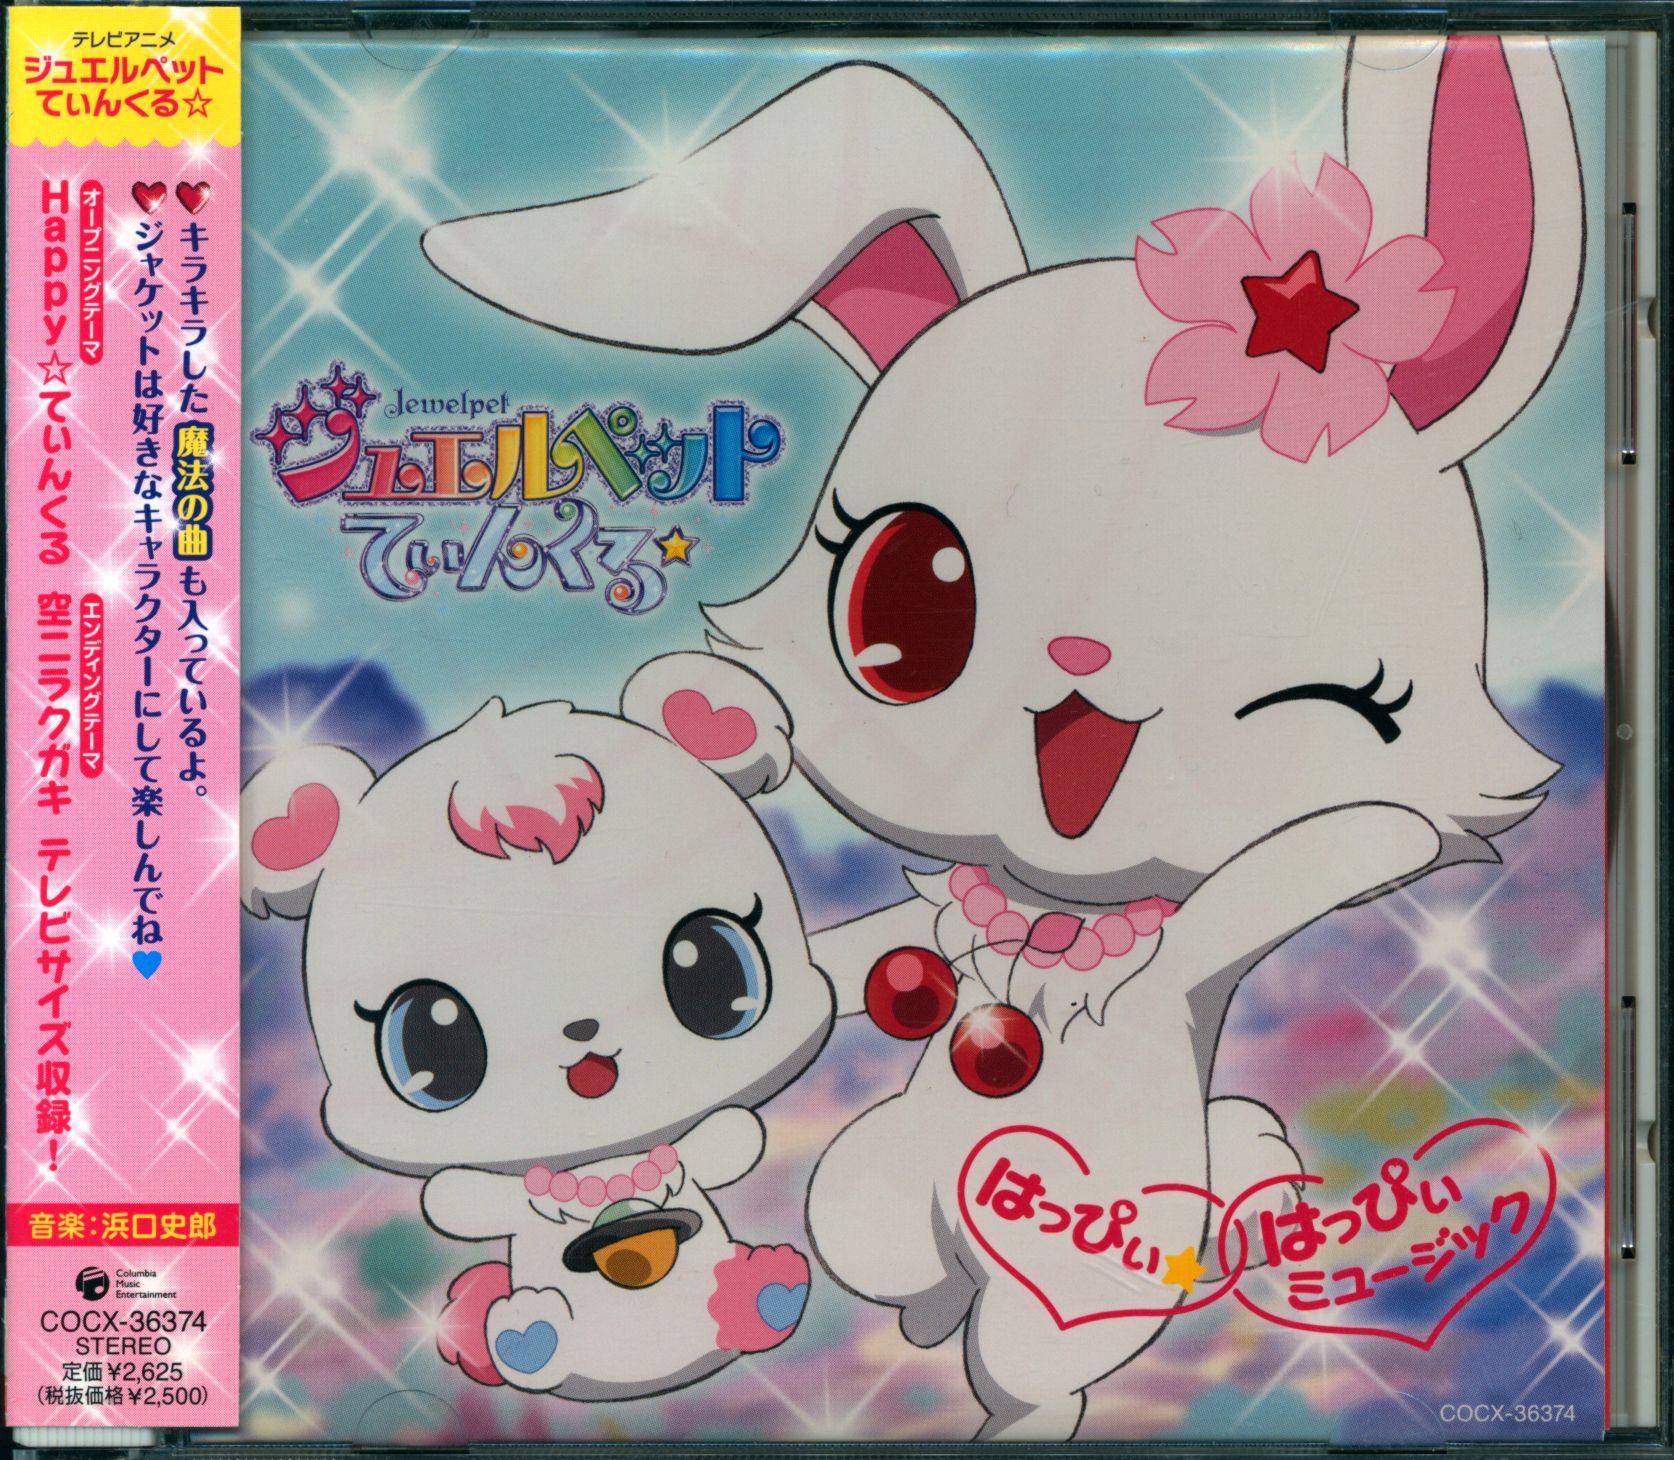 Anime Thoughts] Jewelpet Kira☆Deco! (2012) | Hypixel Forums